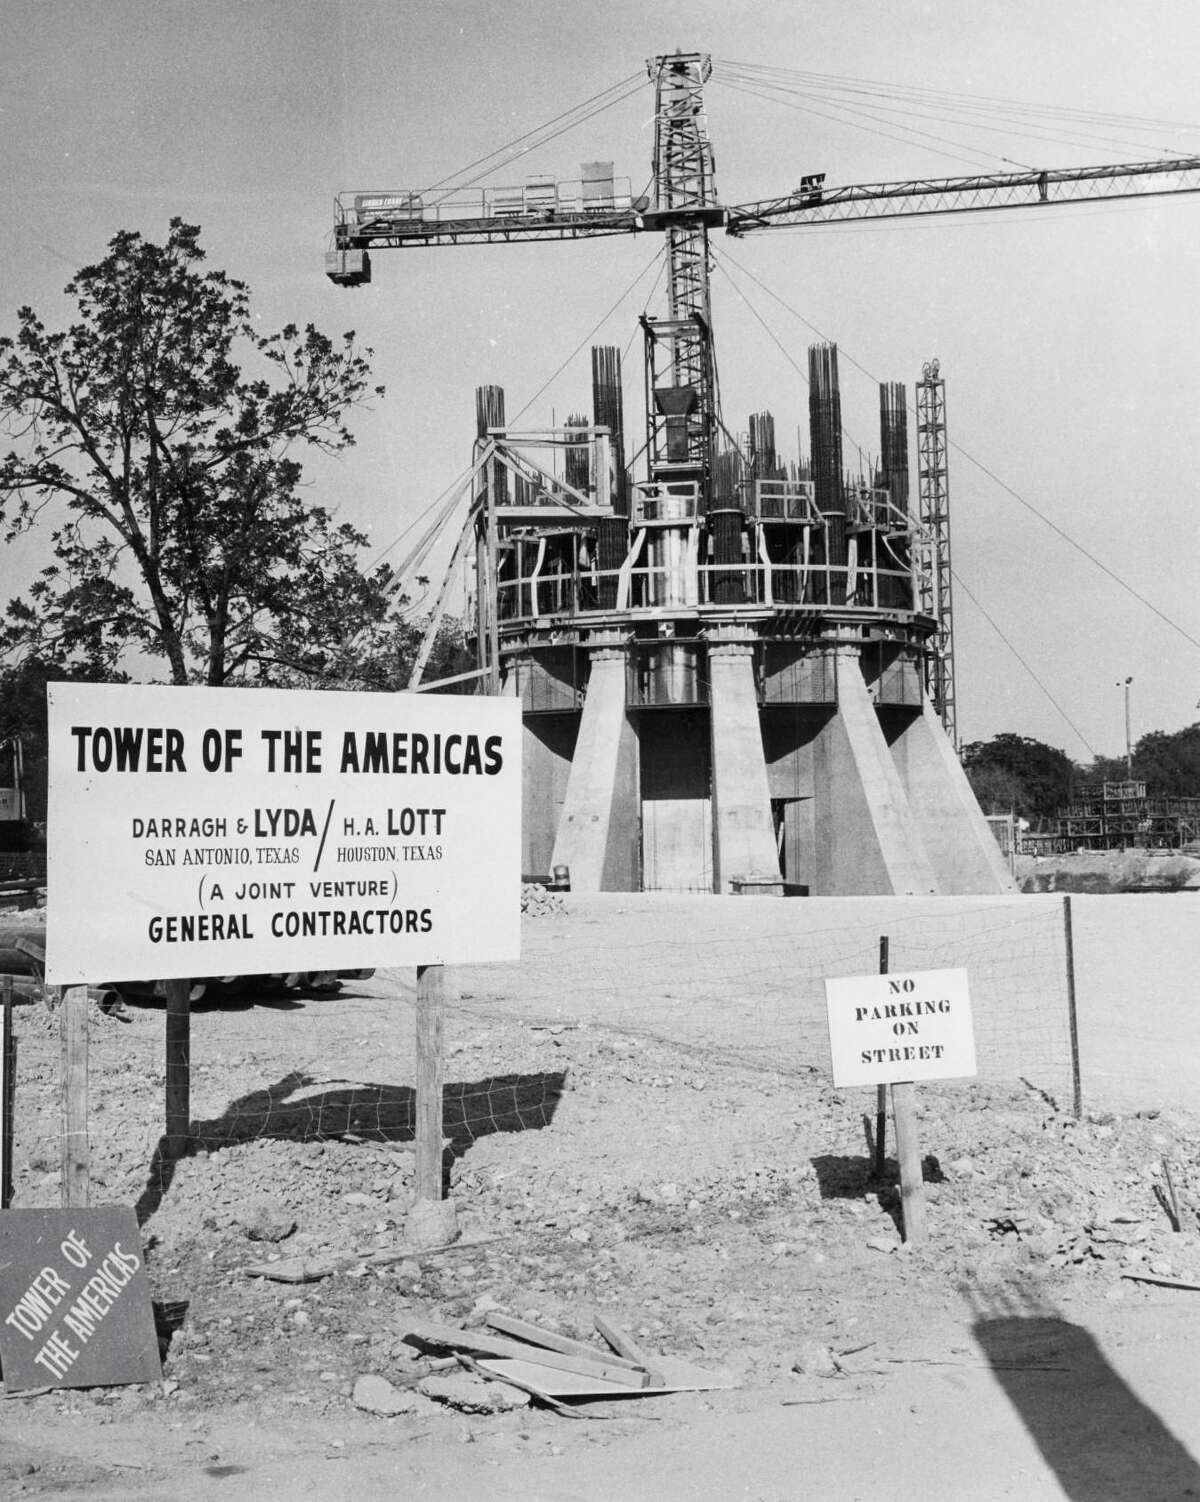 During the early stages of construction in 1966, wedge-shape concrete structures support the base of the future Tower of the Americas, with rebar and mechanical crane on top. Signs credit a “joint venture” of the general contractors, Lyda & Lott of San Antonio and H.A. Lott of Houston.